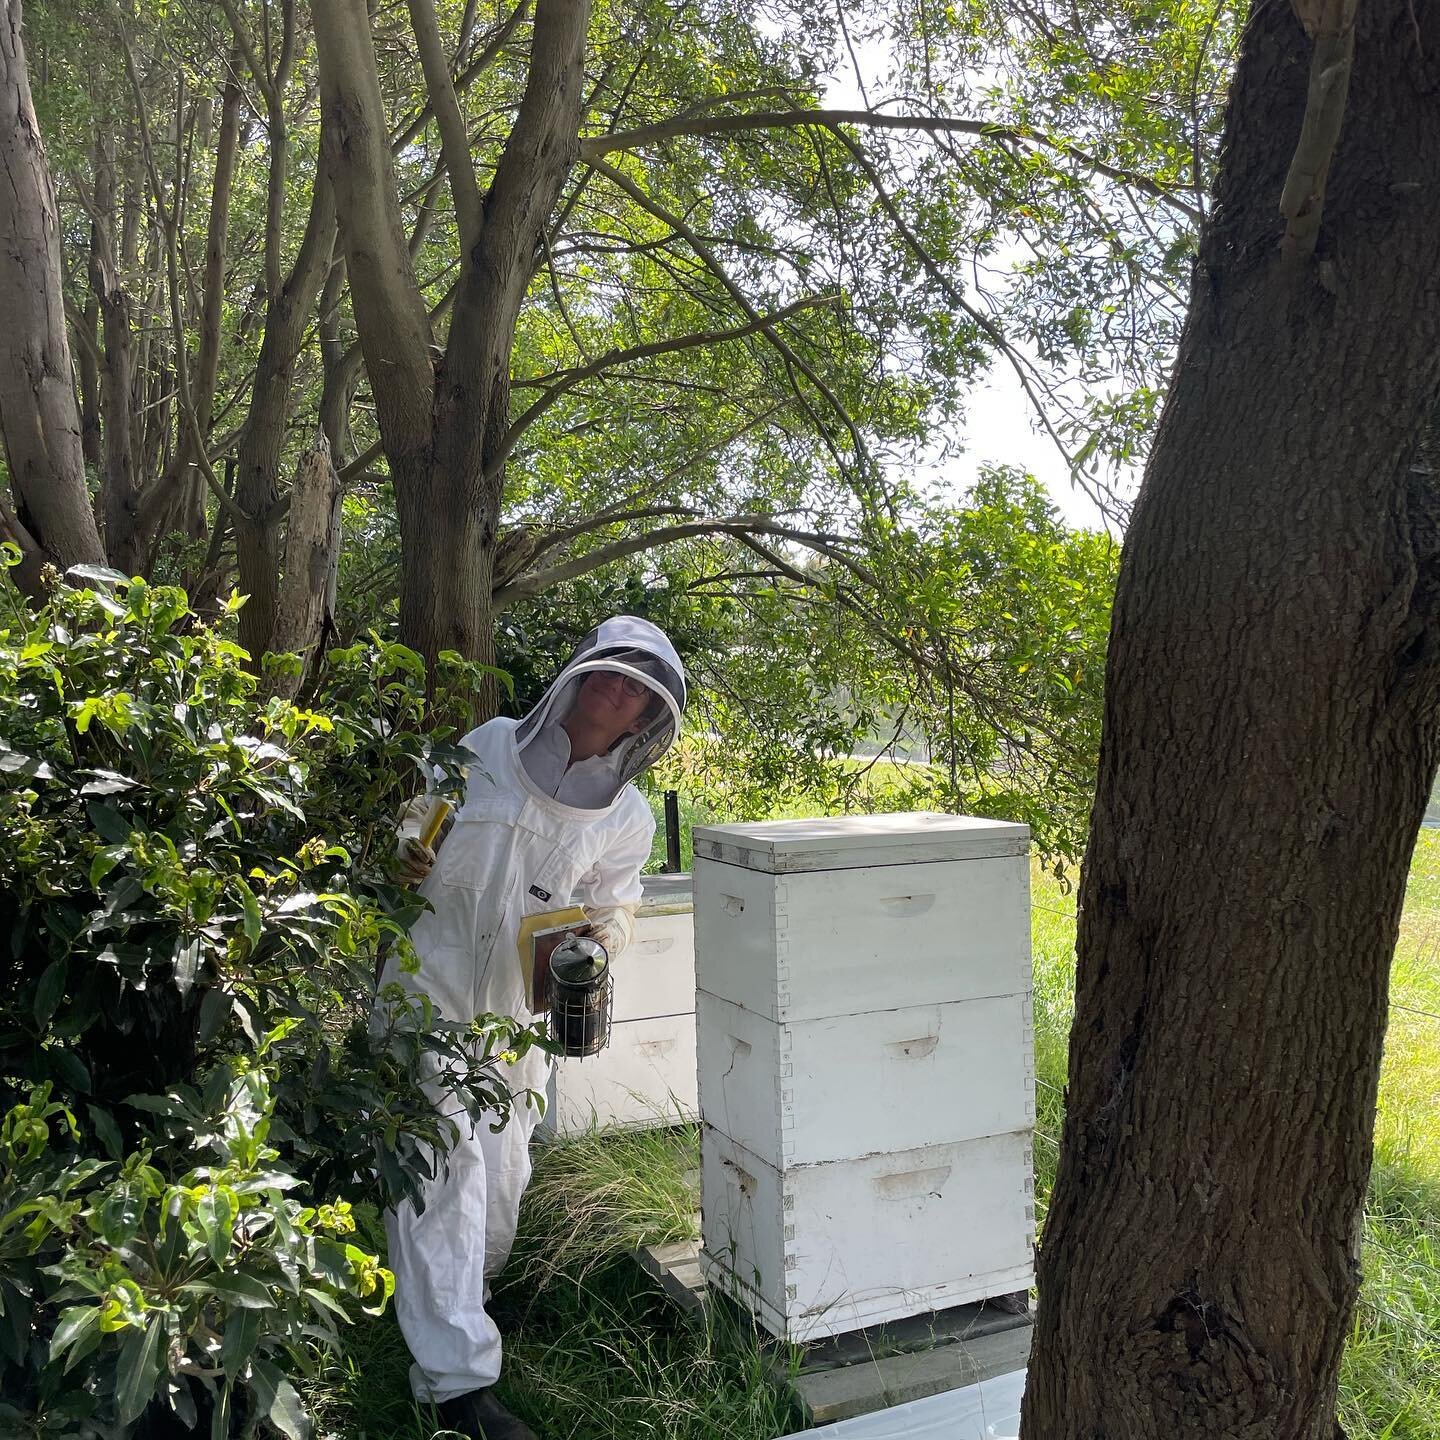 A day with the bees.
We&rsquo;ve been conscious about keeping as much bee food around the farm as possible, leaving areas untouched so plants can flower. It&rsquo;s been a prolific clover and dandelion season with all this summer rain and the bees ha